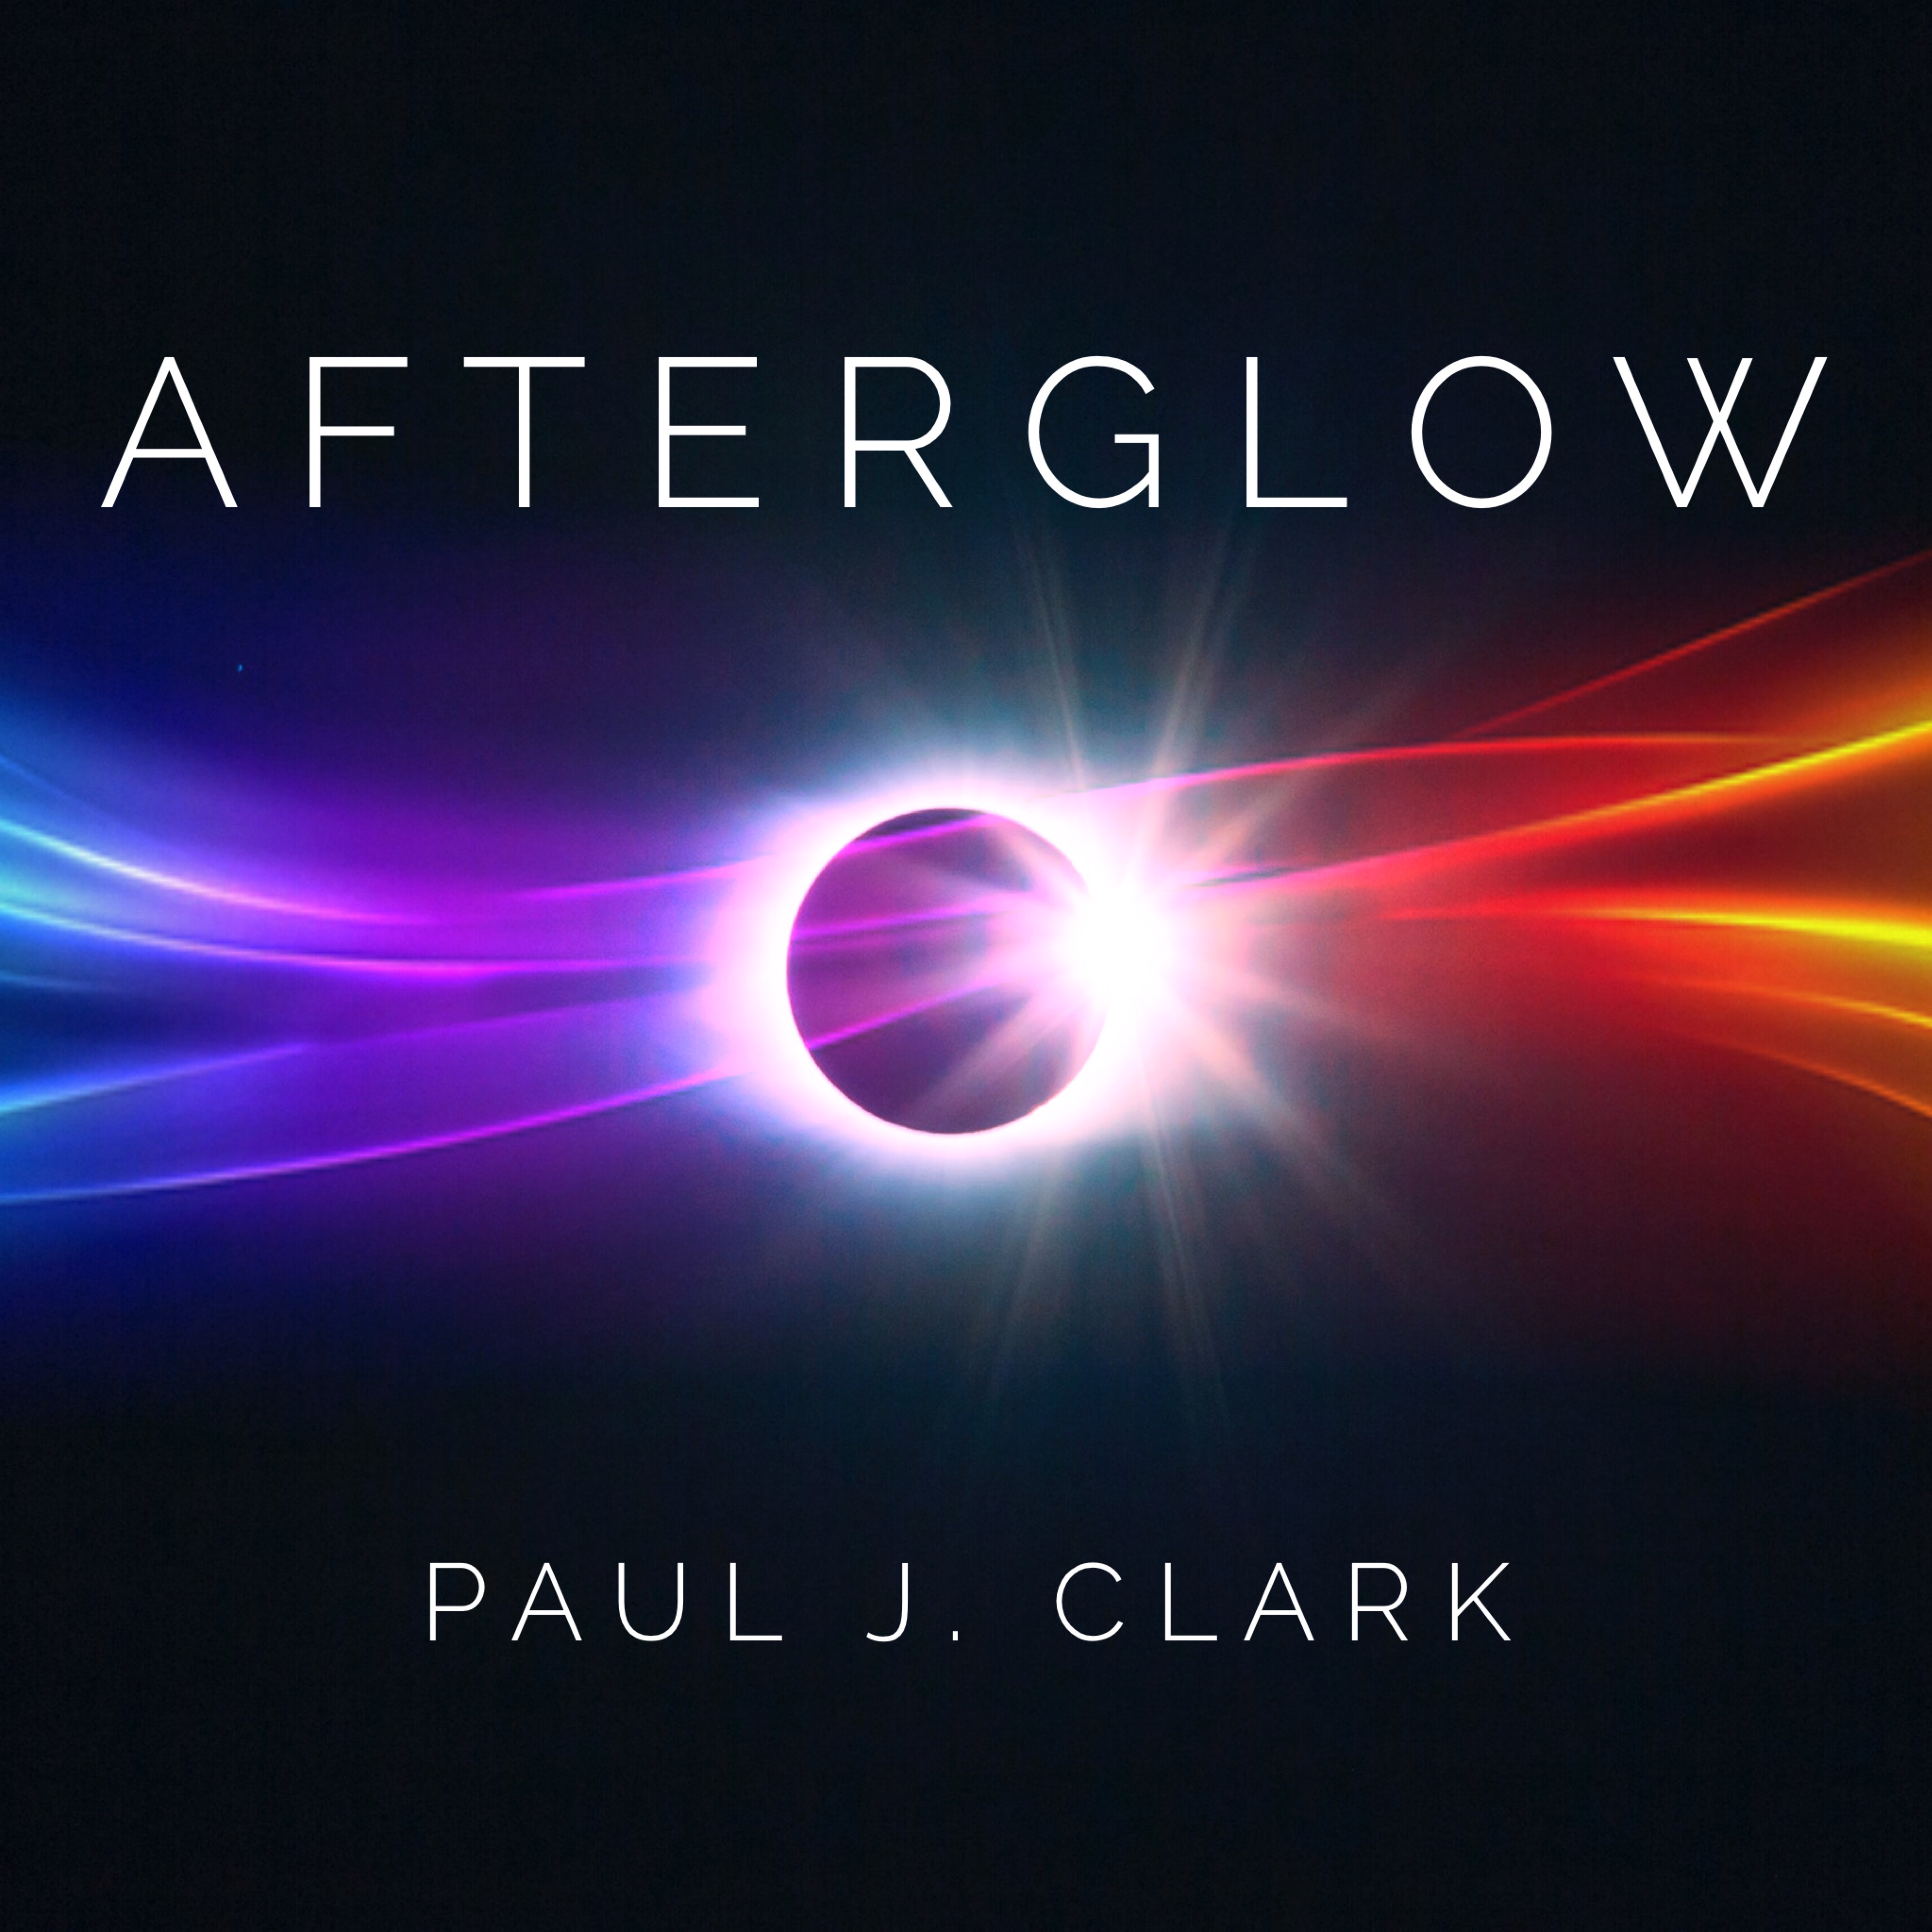 Paul J. Clark is celebrating life in the Afterglow